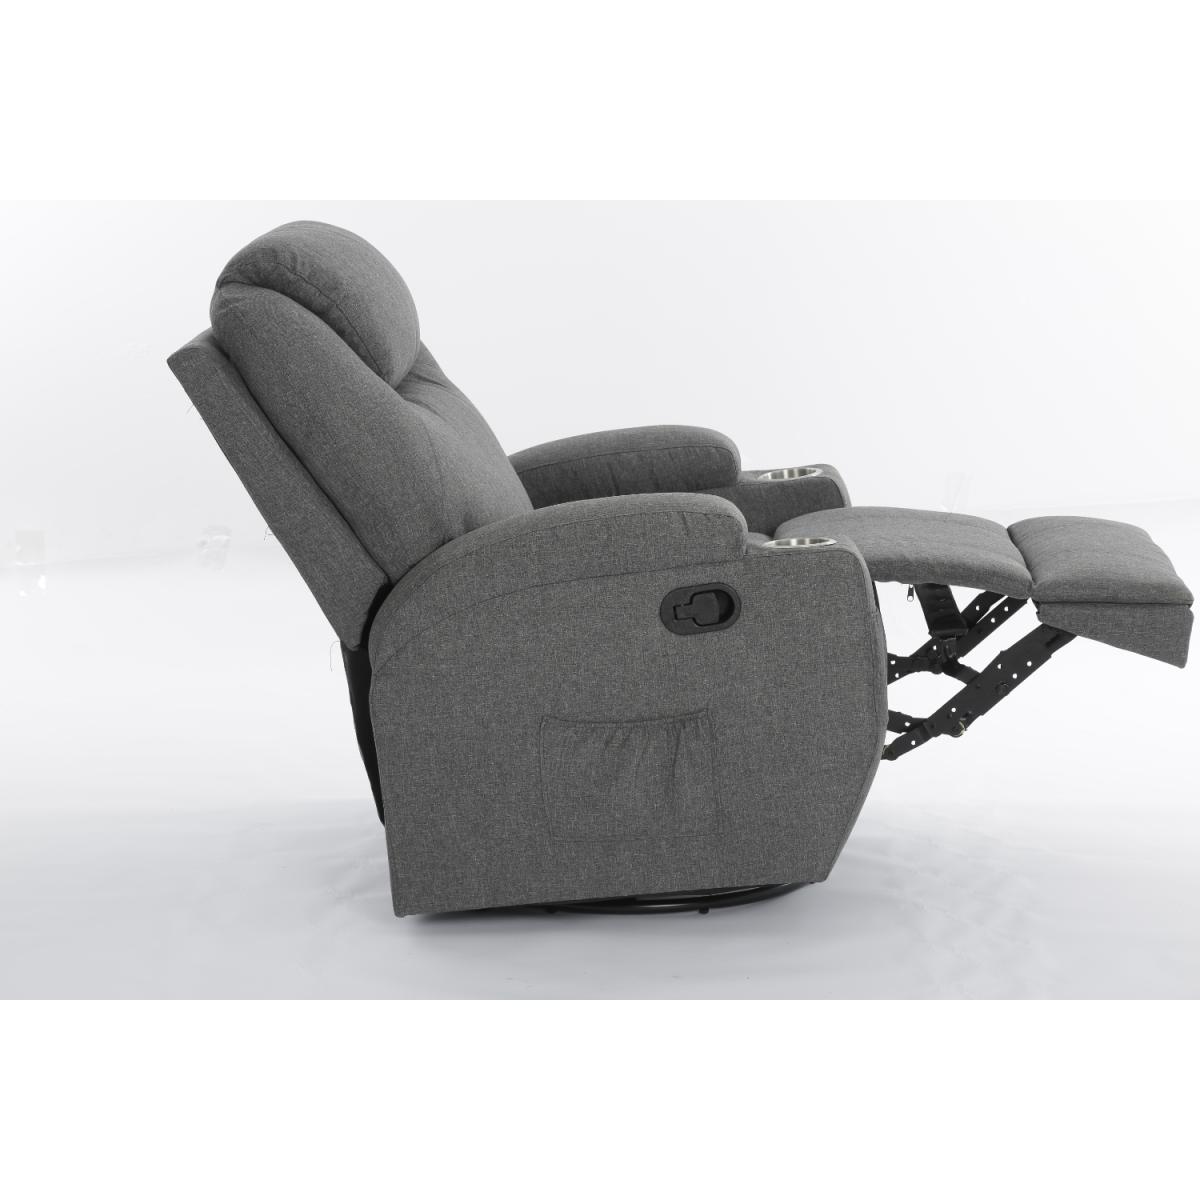 SILLON RECLINABLE/GLIDER GRIS